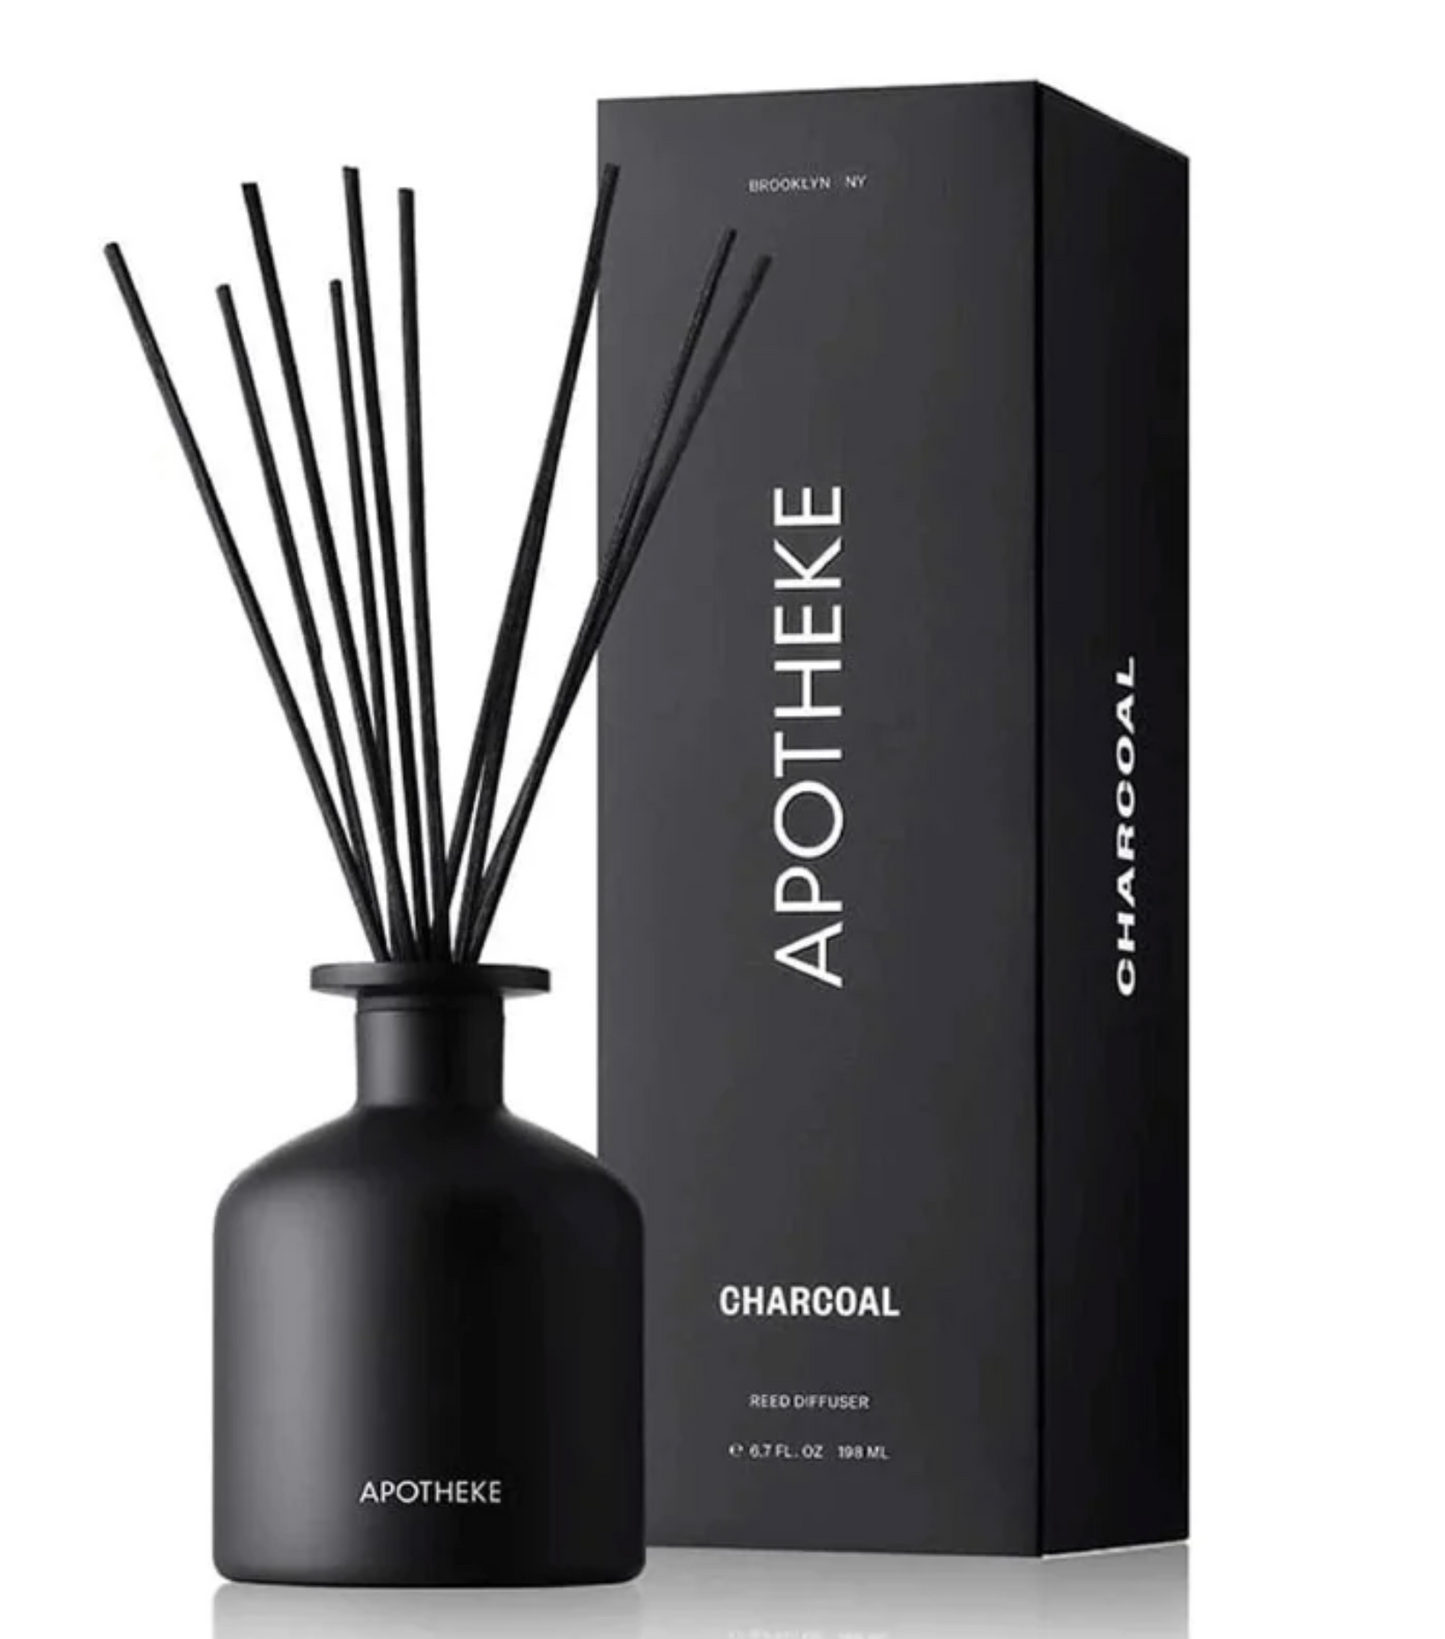 Charcoal Reed Diffuser, 6.7oz